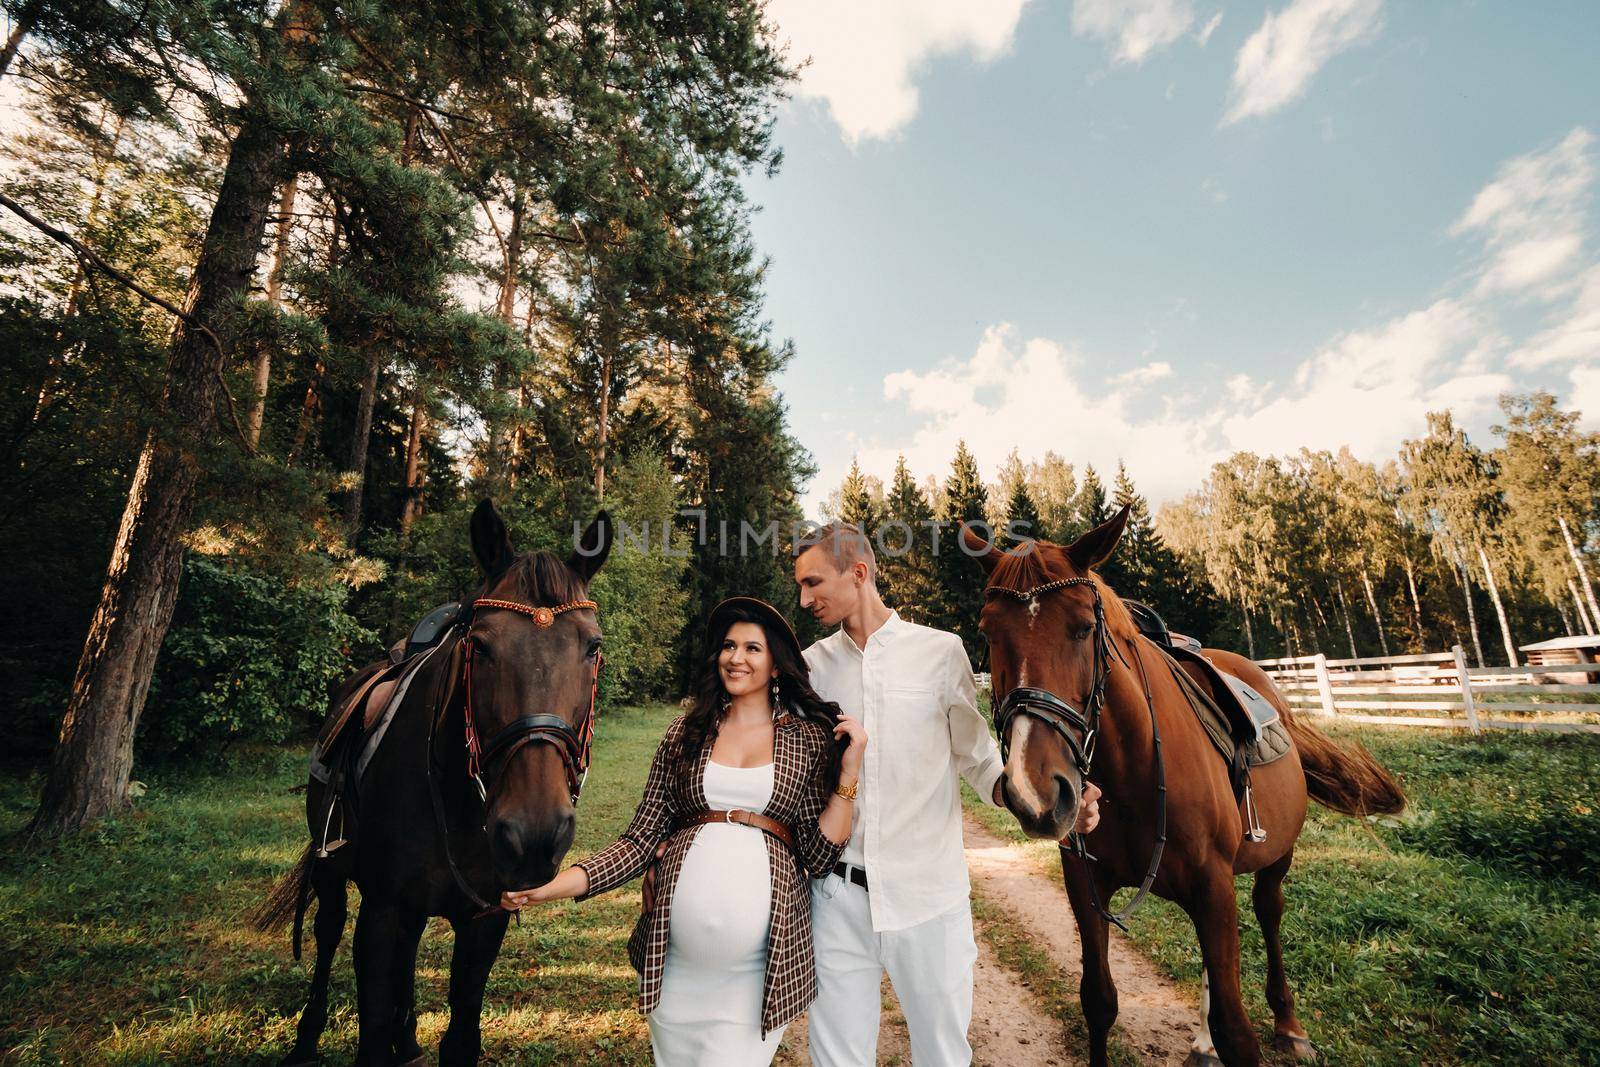 A pregnant woman in a hat with a man in white clothes walking with horses in nature. A family waiting for a child walks in the woods.